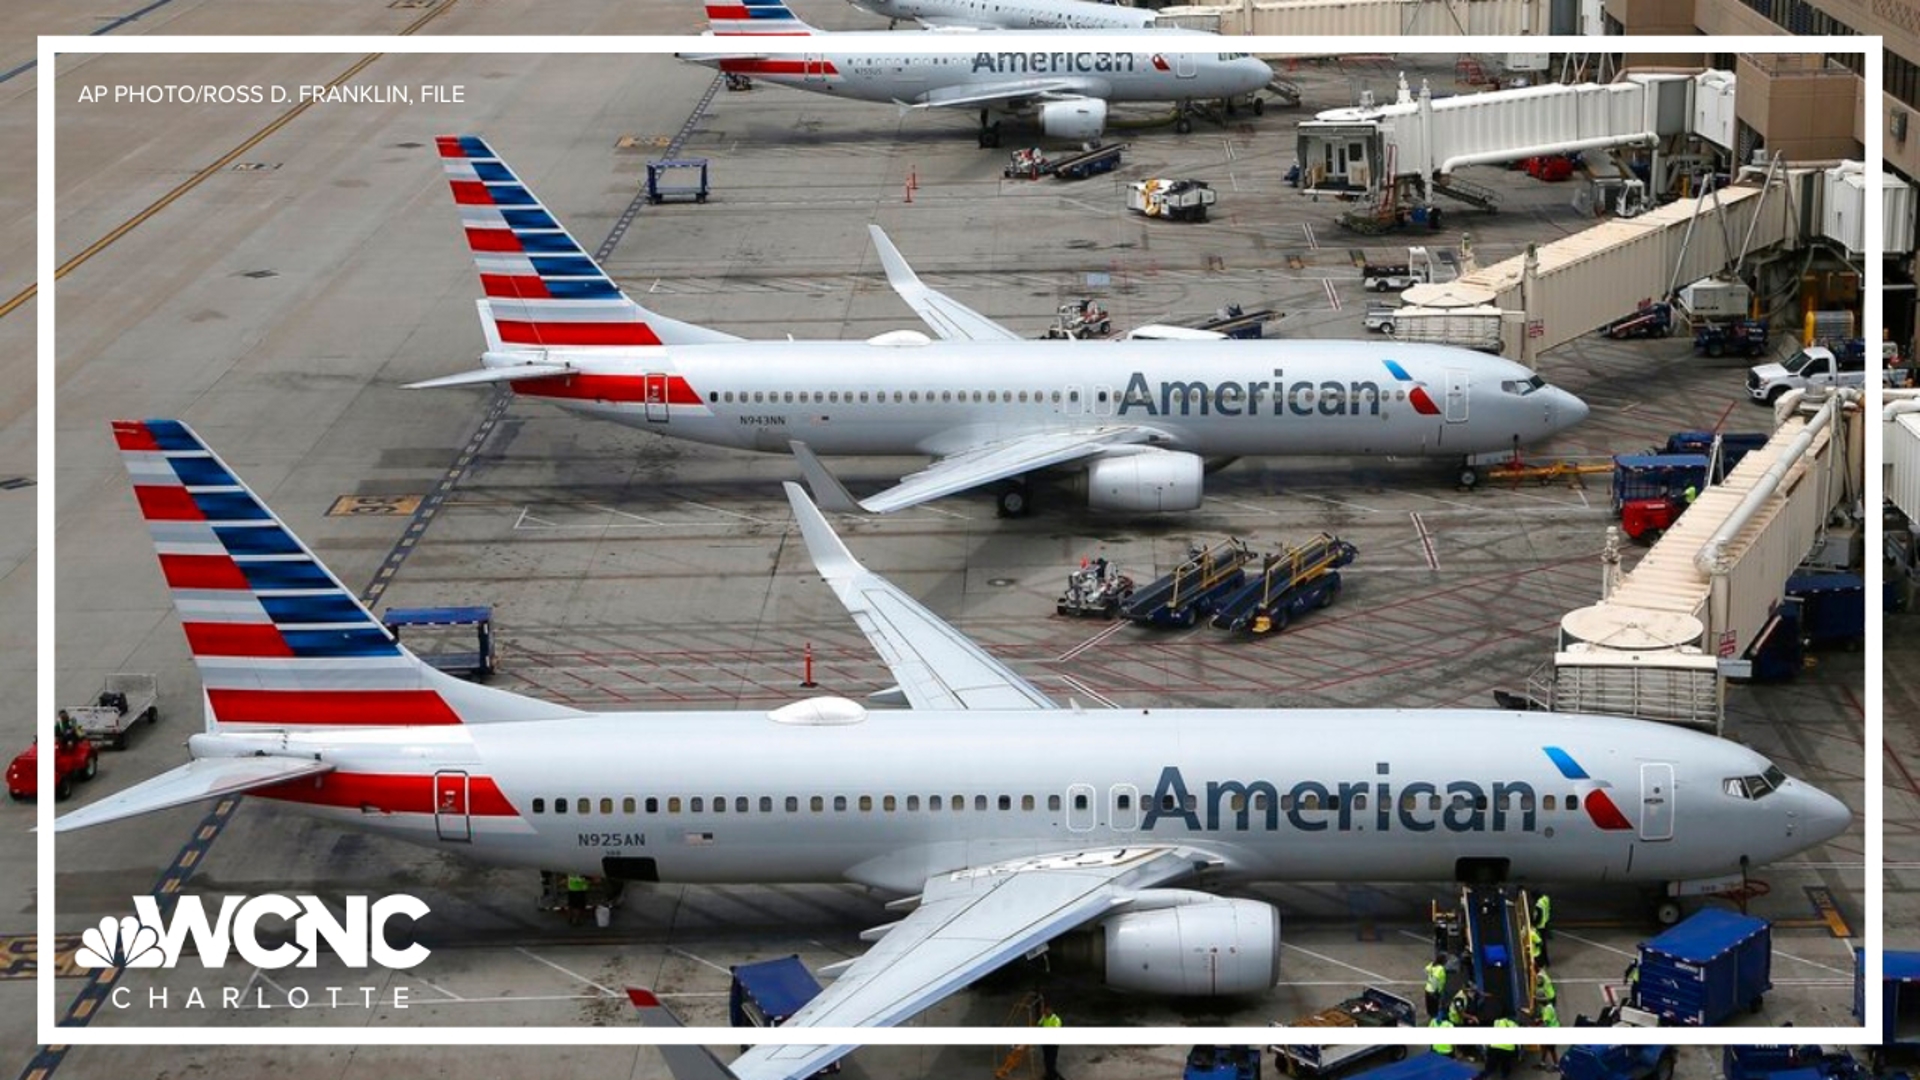 American Airlines says it's ready to handle more than 8 million customers through Charlotte Douglas alone this year.